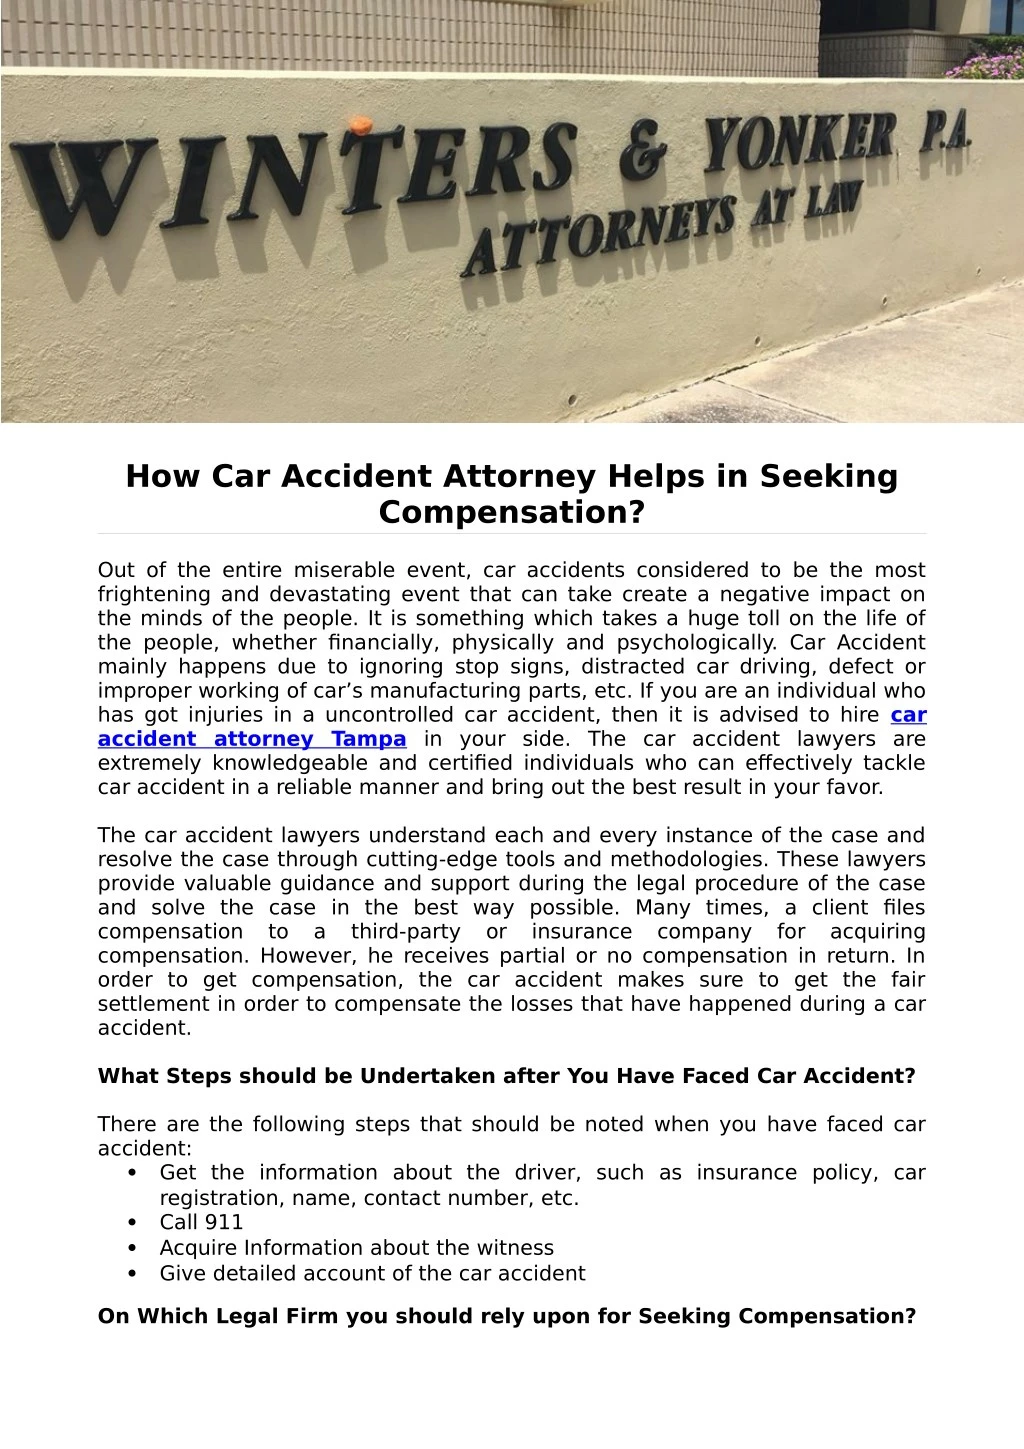 how car accident attorney helps in seeking